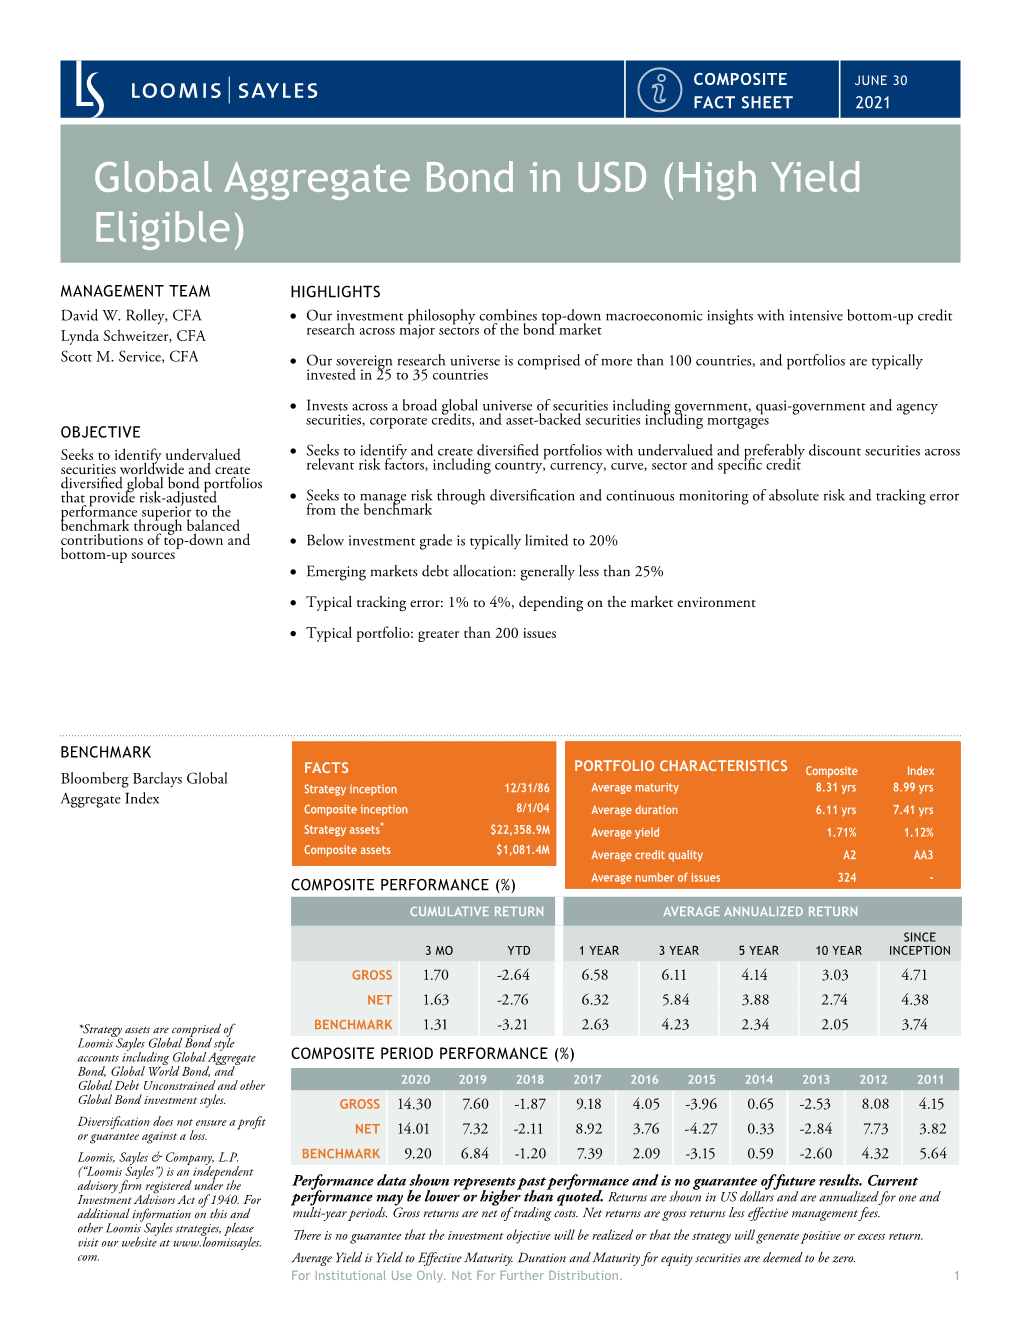 Global Aggregate Bond in USD (High Yield Eligible)